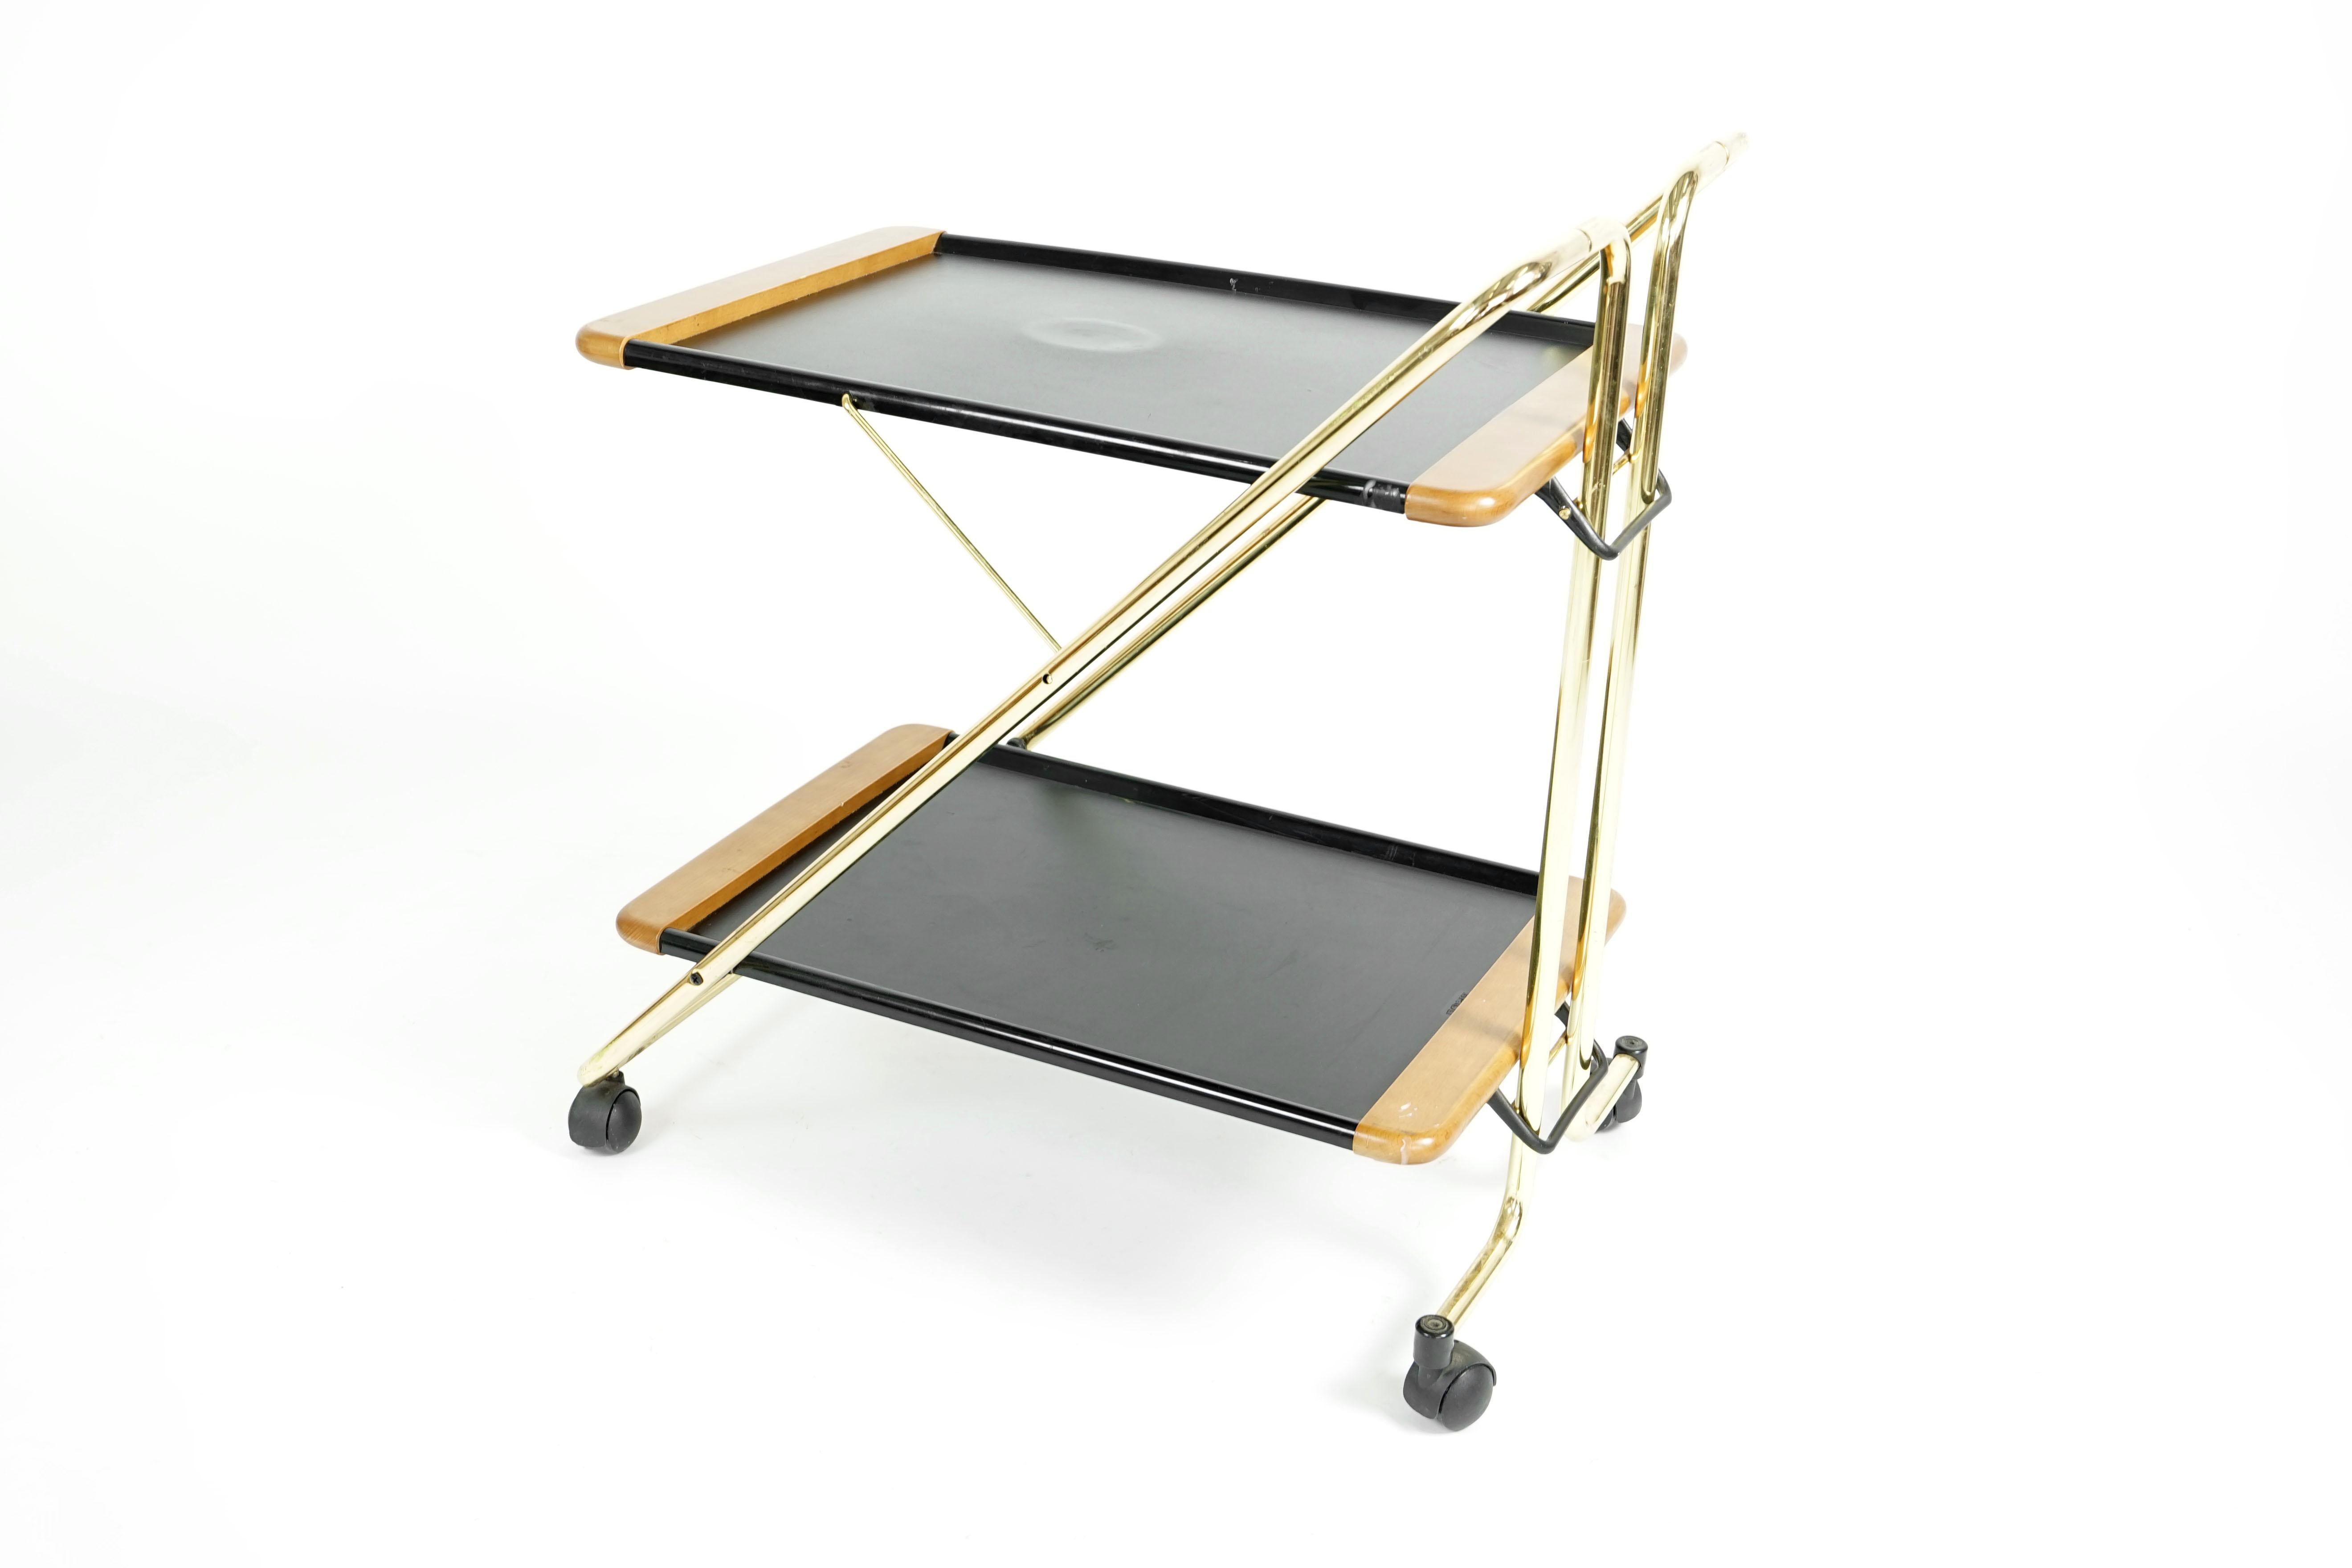 Wonderful Mid-Century Modern folding serving cart with a brass frame and black shelves. Original vintage conditions. Shows signs of use.